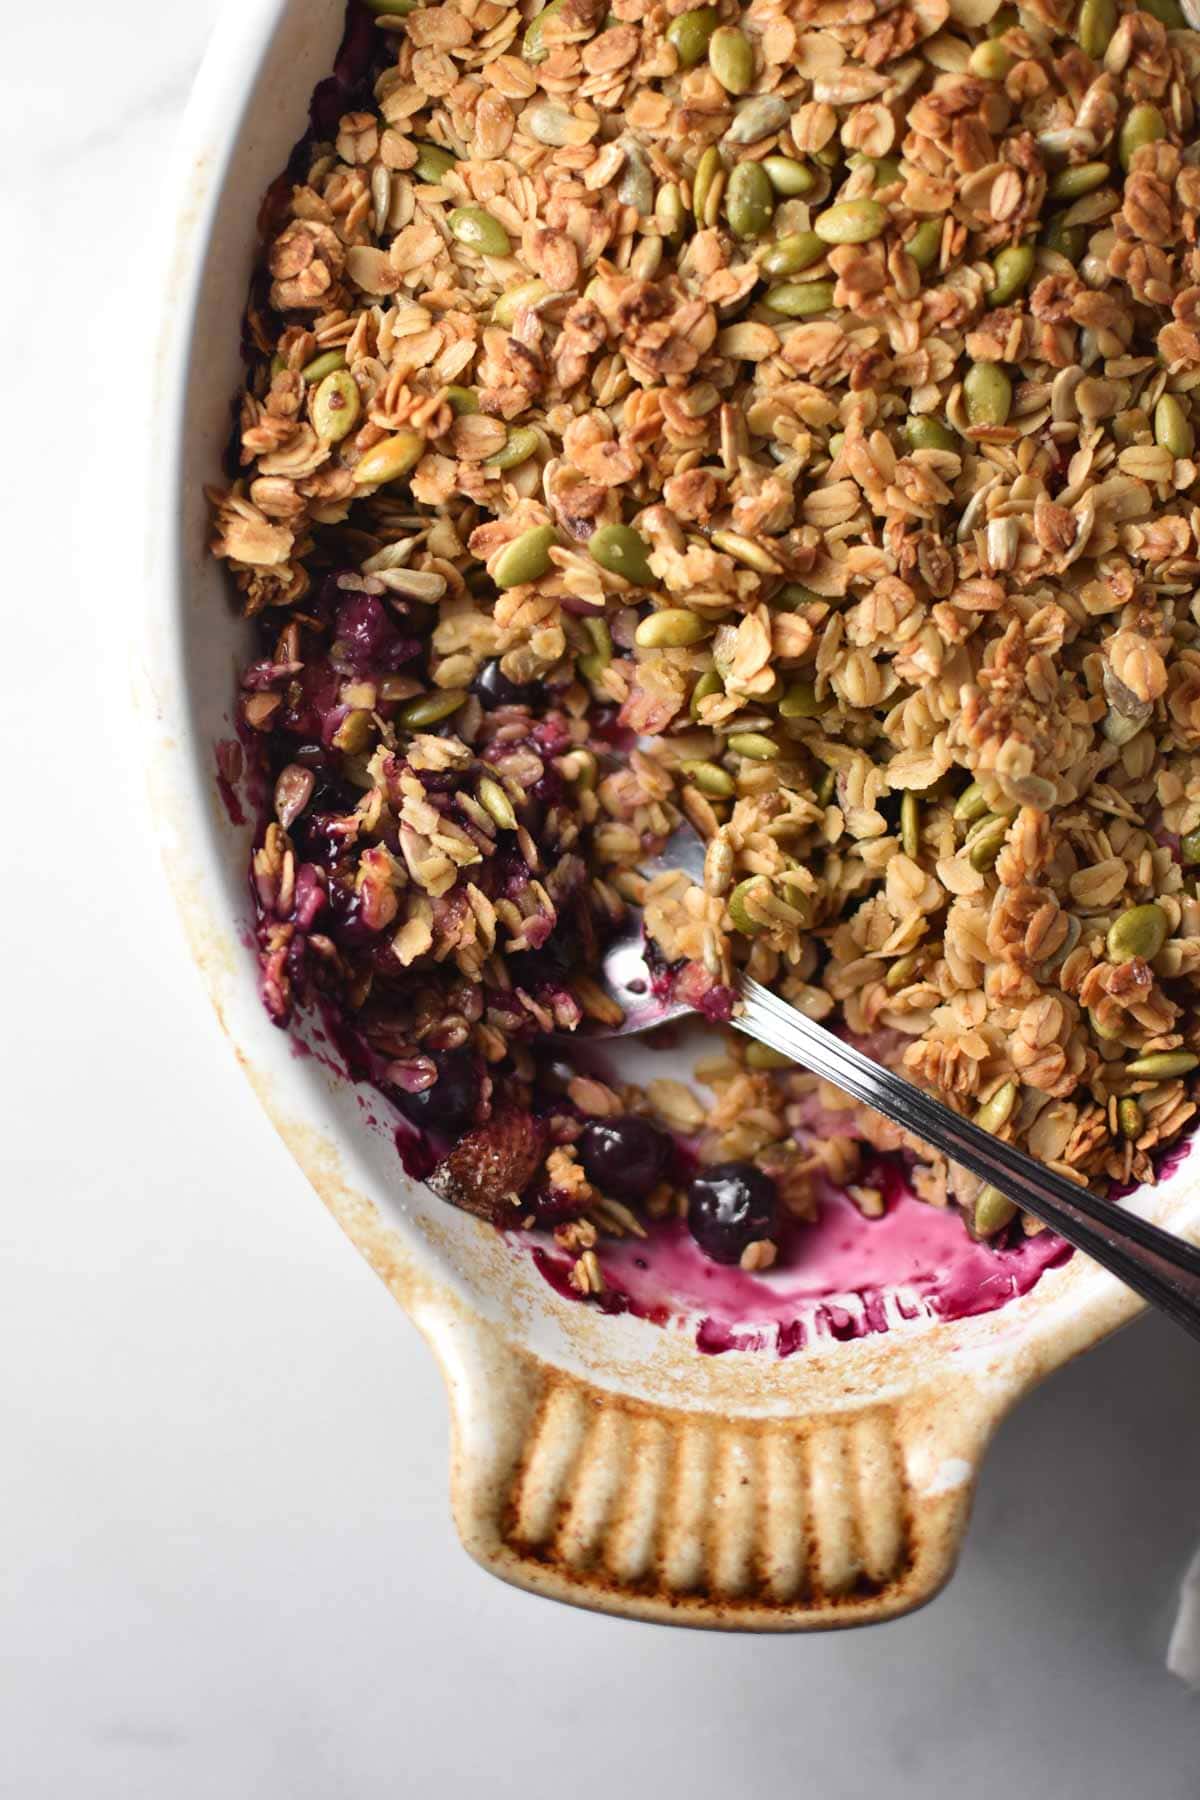 A spoon digging into a gratin dish with a berry crisp topped with seeds and oatmeal